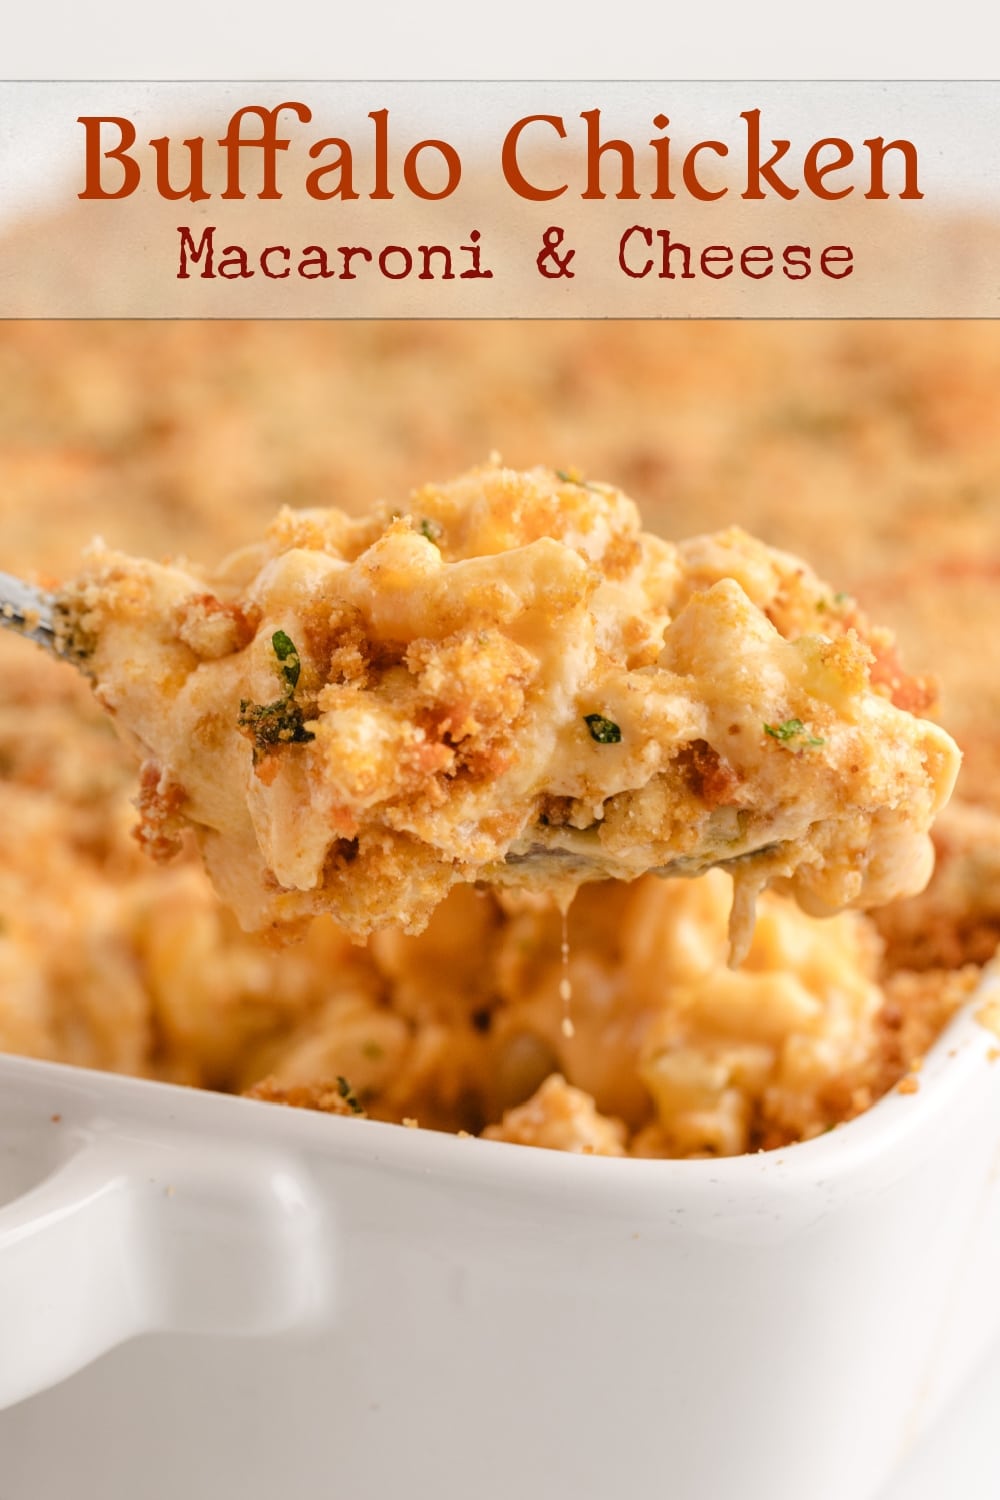 Without hesitation, this buffalo chicken mac and cheese takes a prime spot on my list of most-loved recipes for bursting-with-flavor pasta comfort dishes. . The chicken and pasta combined with the creamy, velvety cheese sauce with a kick is one you soon won't forget. This is the best football tailgate food and needs to make an appearance on game day. via @cmpollak1